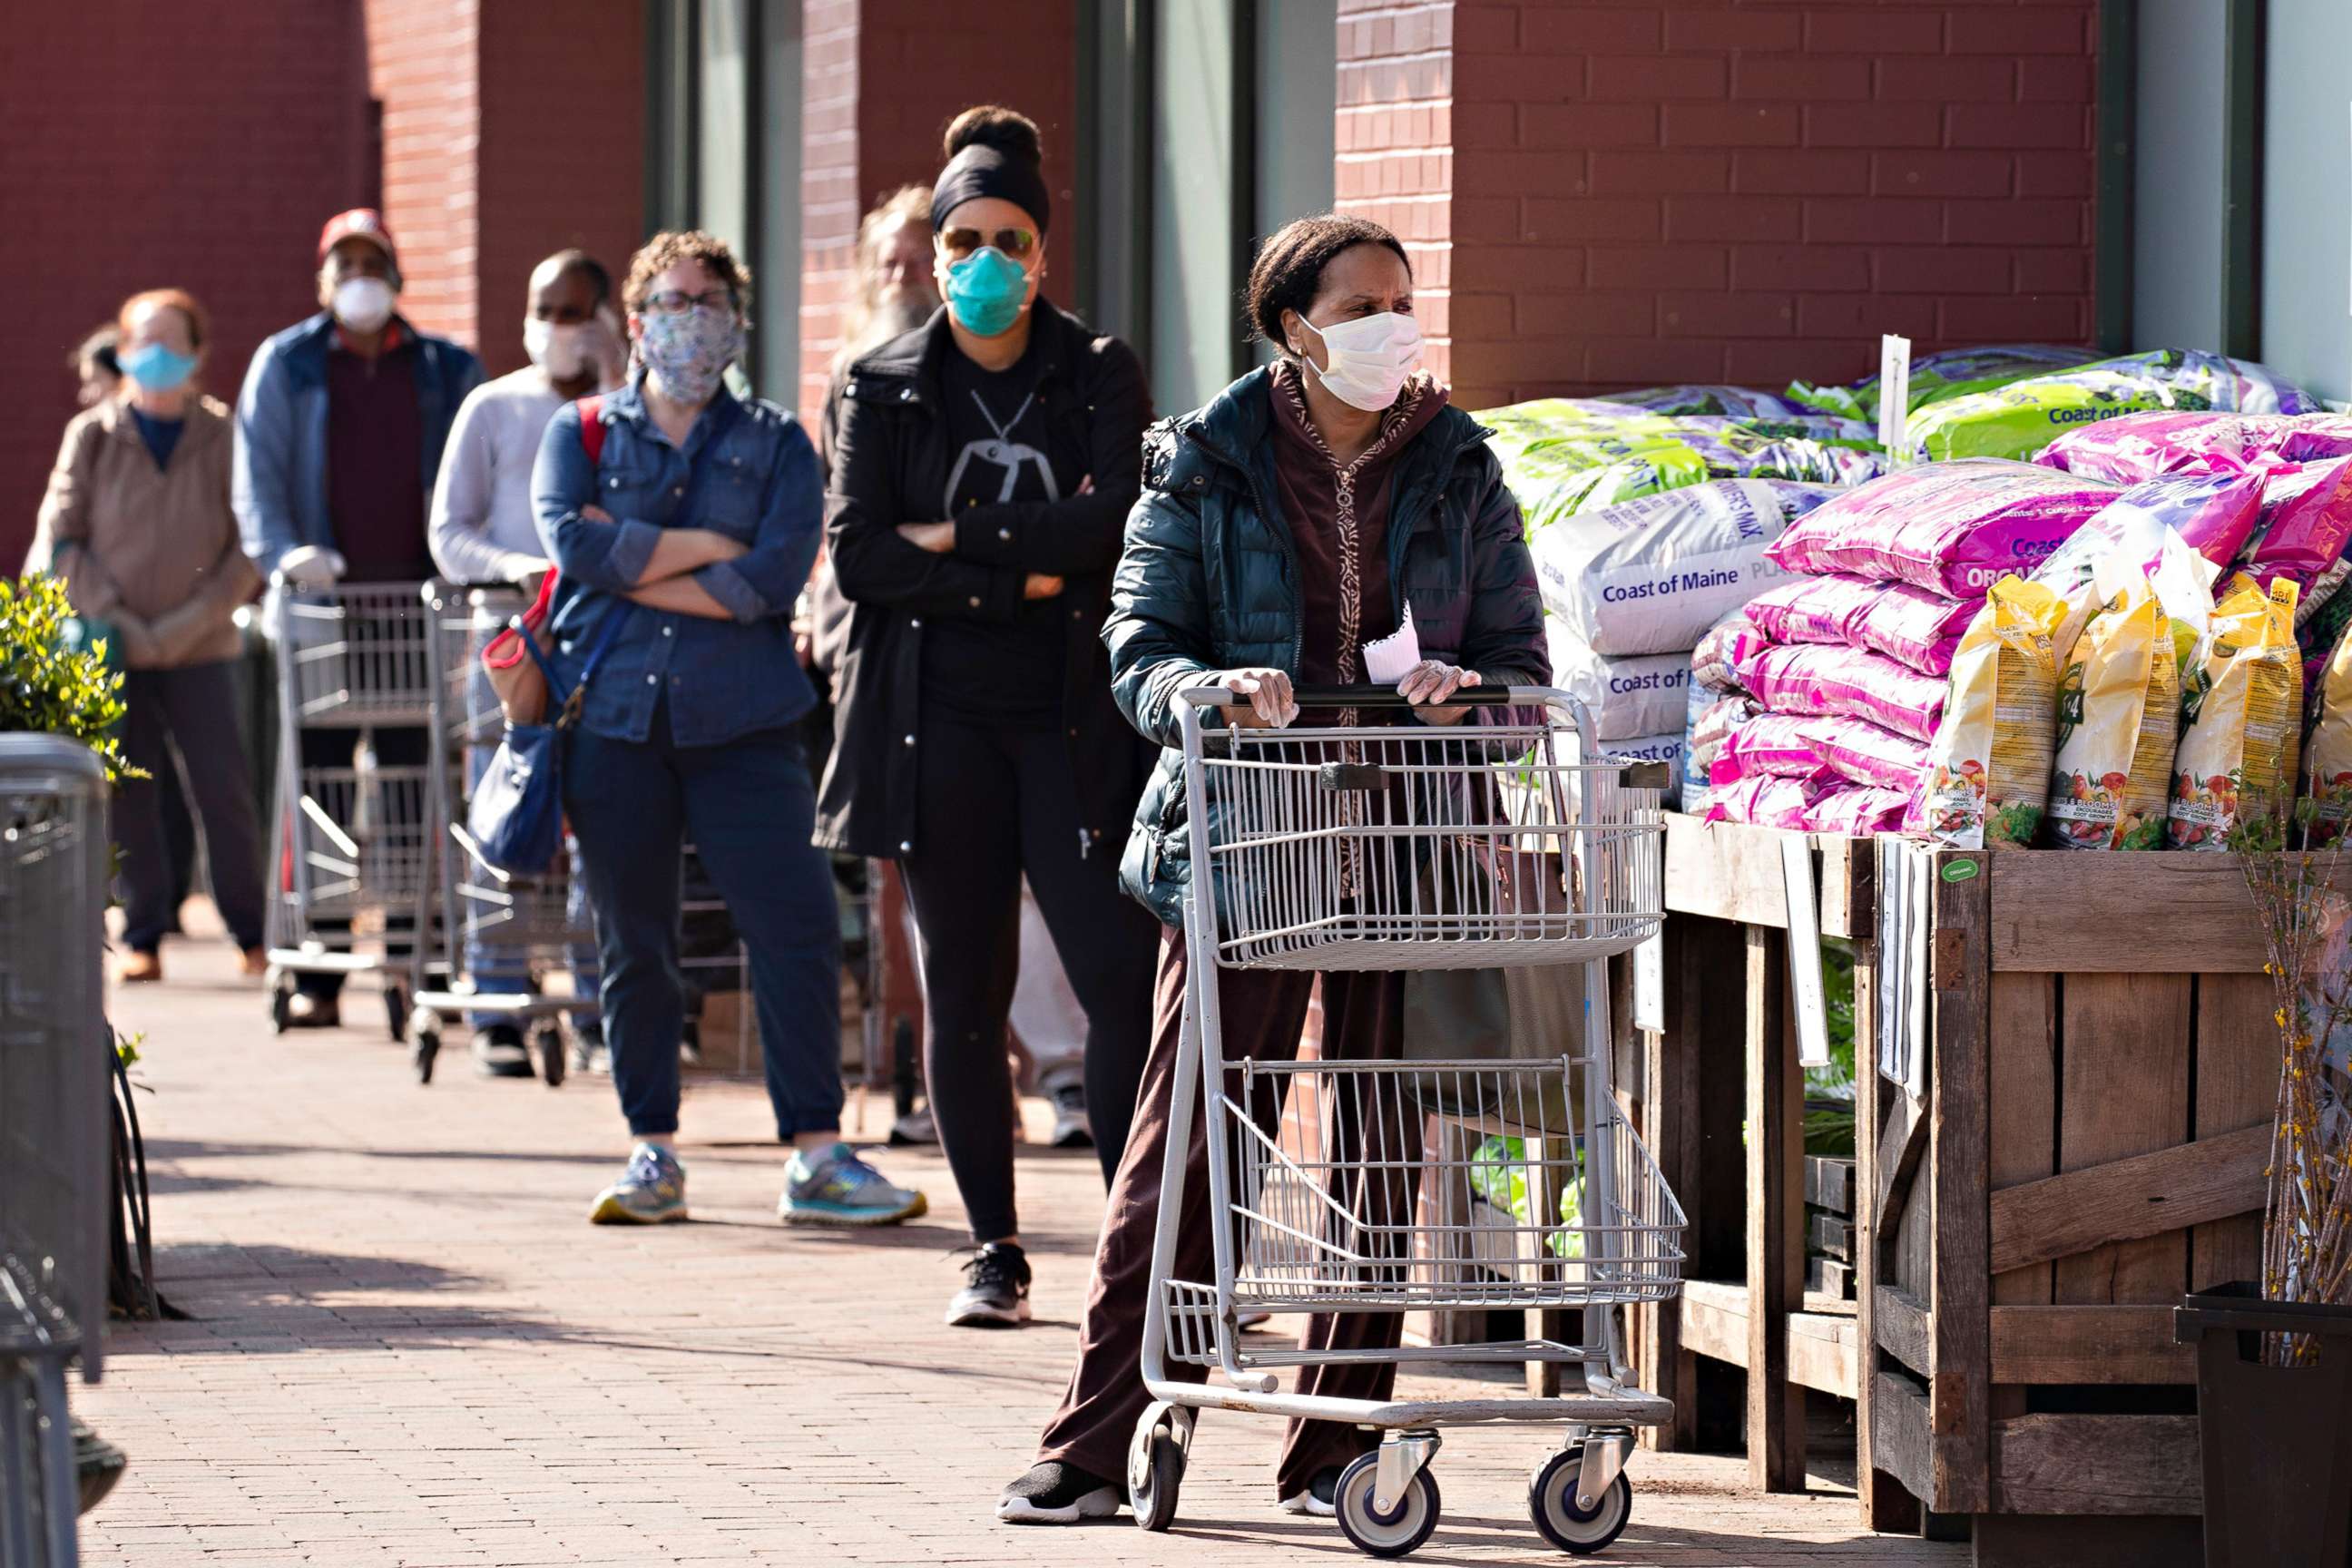 PHOTO: Customers practice social distance guidelines while waiting in a line to enter a Whole Foods Market store in Silver Spring, Md., April 7, 2020.